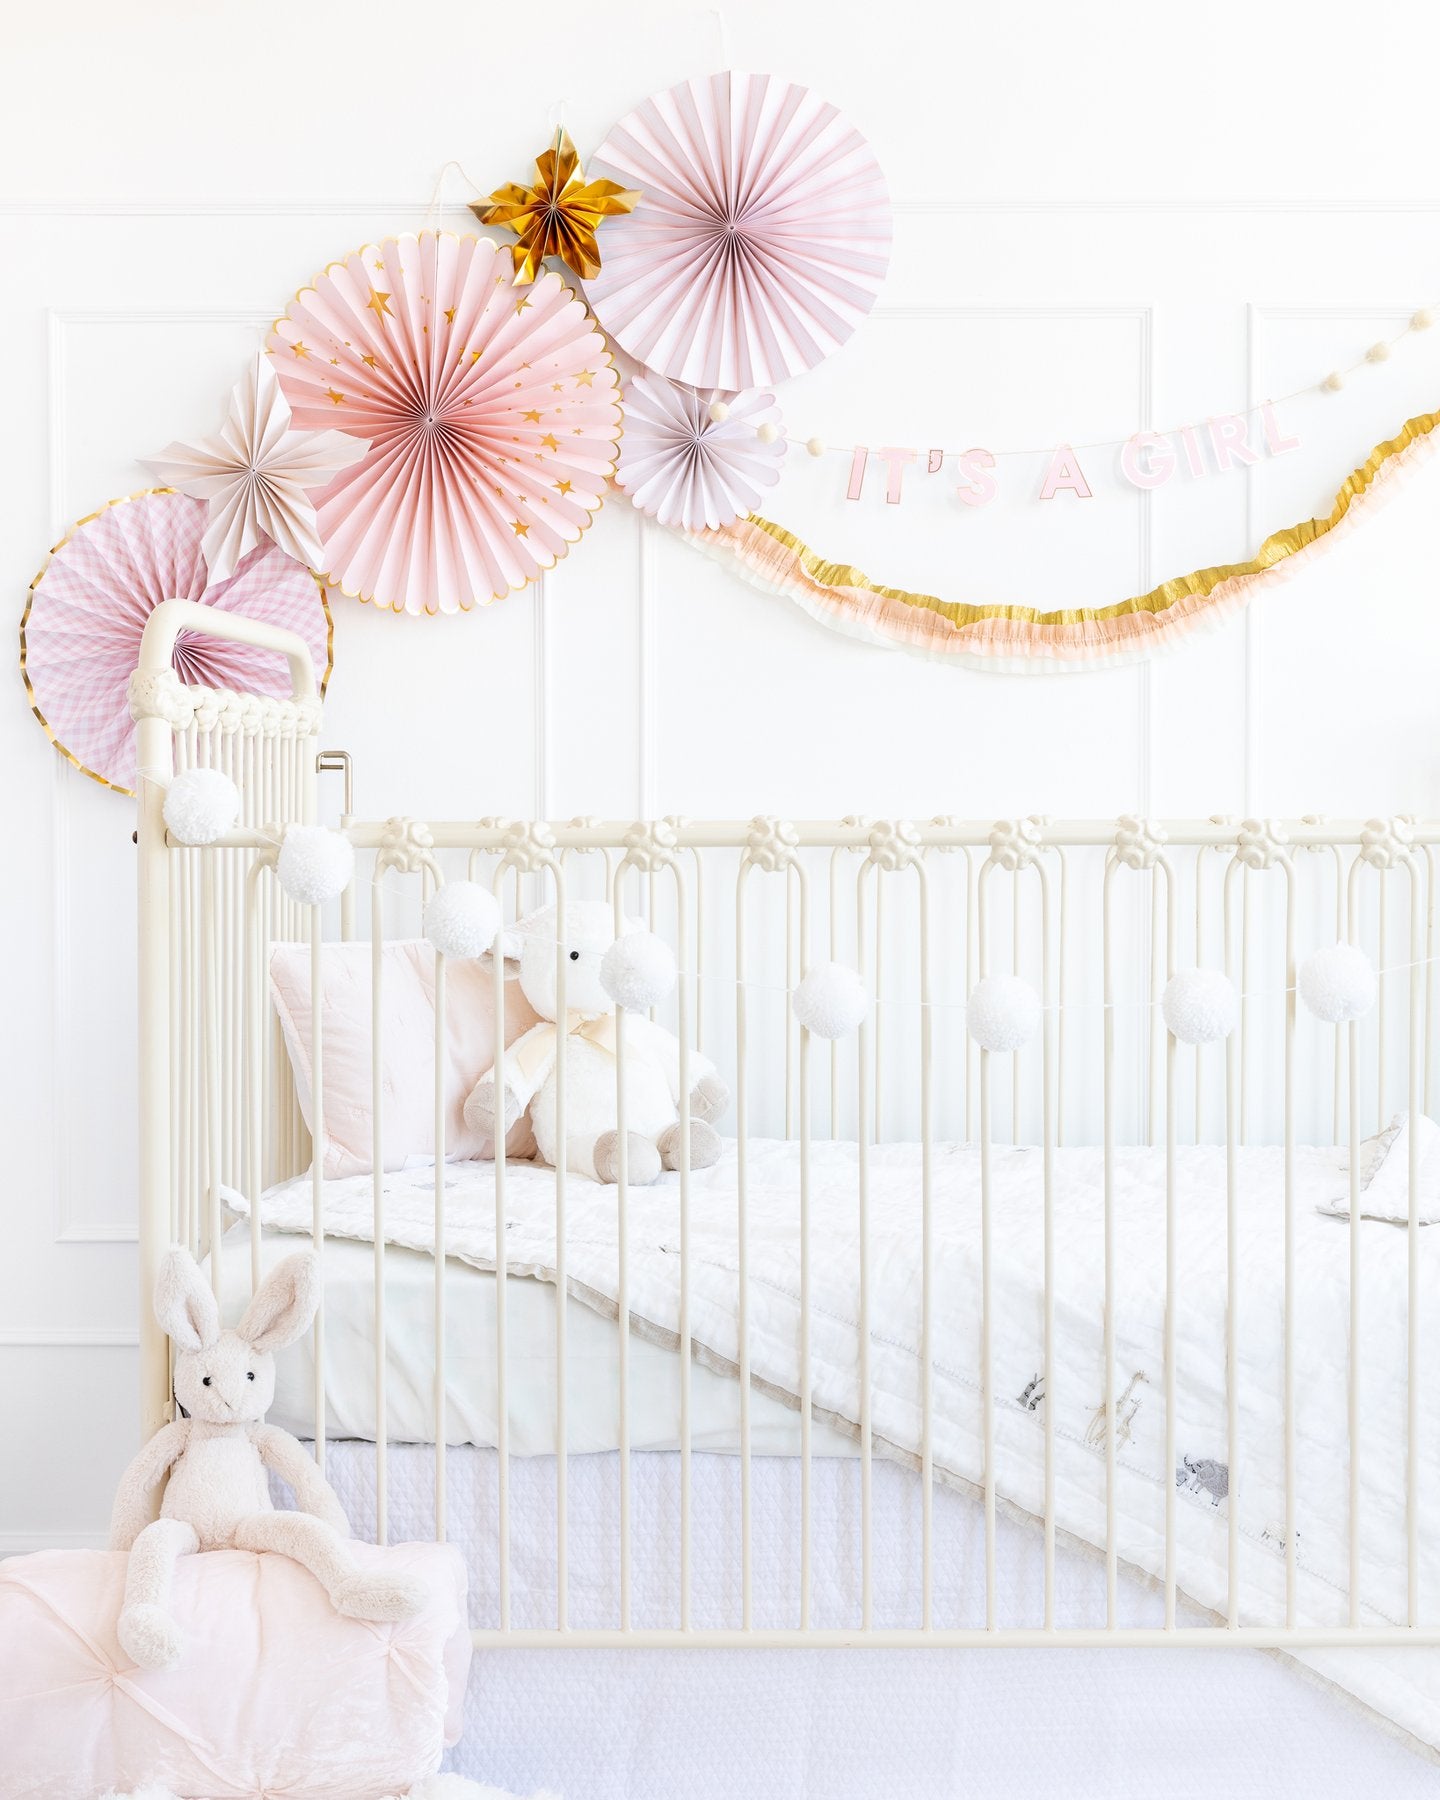 My Mind's Eye Baby Crea/Pink/Gold Crepe Paper Banner in package hanging above a white baby cot